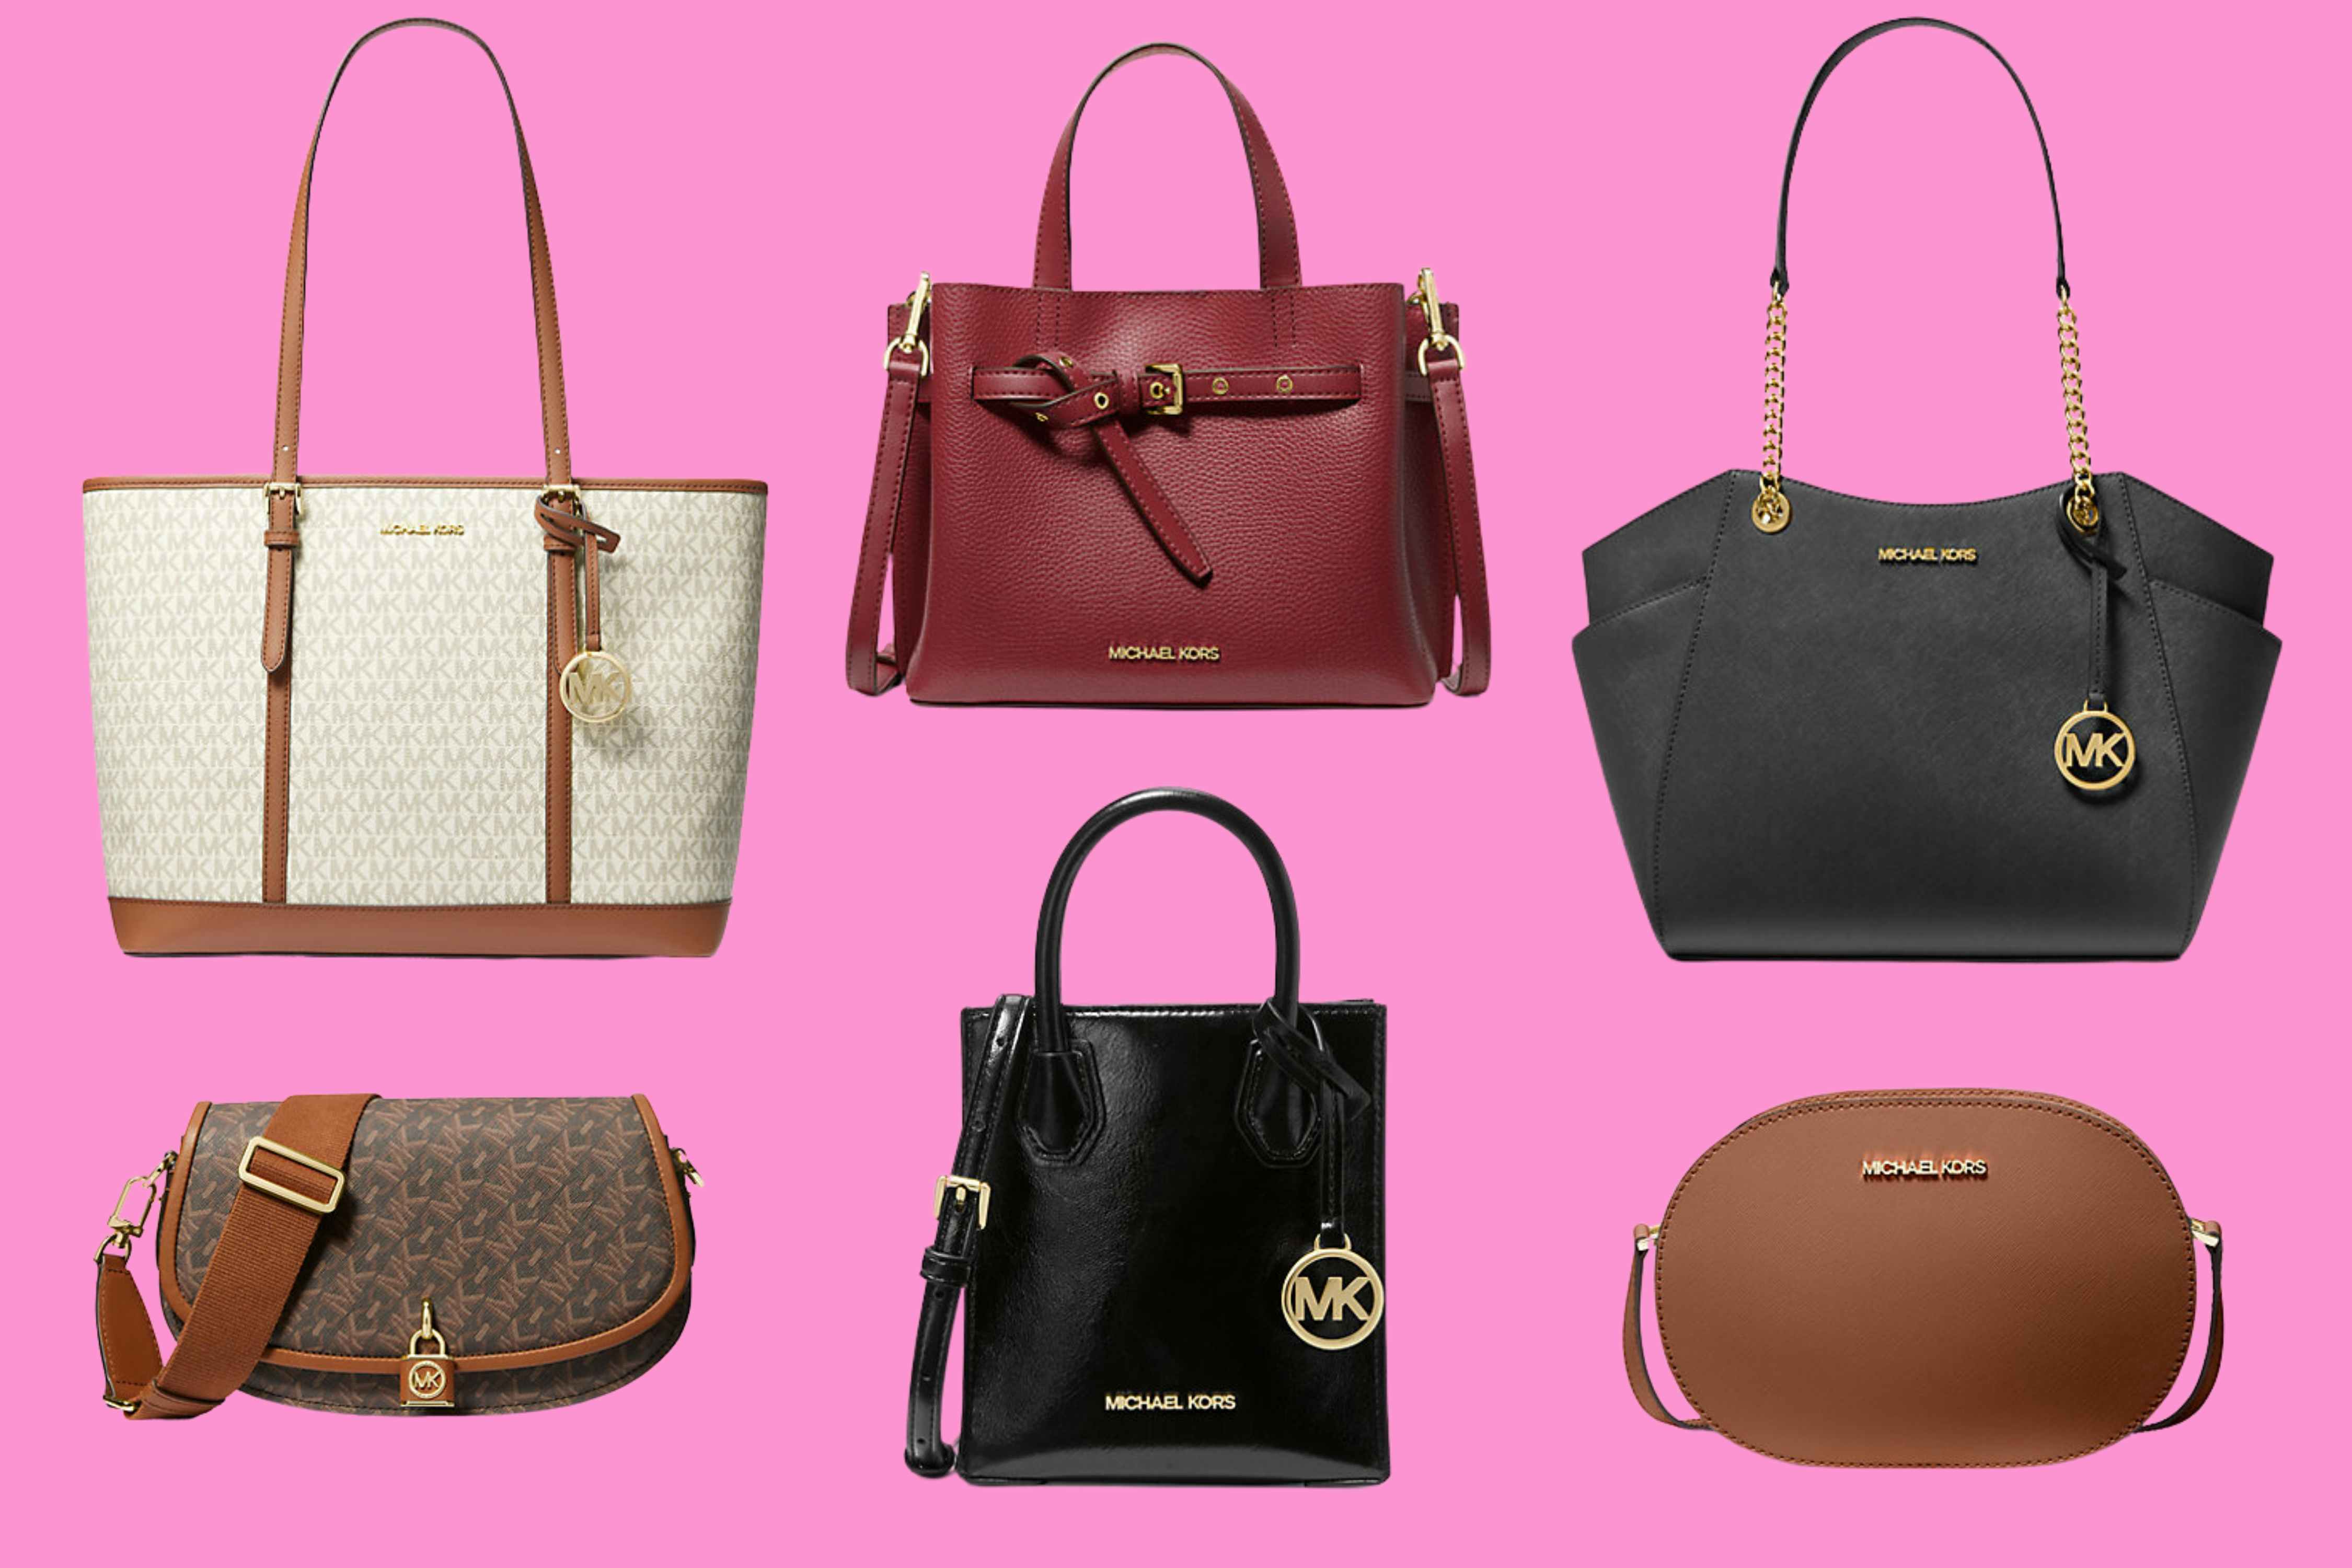 Michael Kors Sale: $47 Crossbody and $95 Large Leather Tote (Reg. $558)